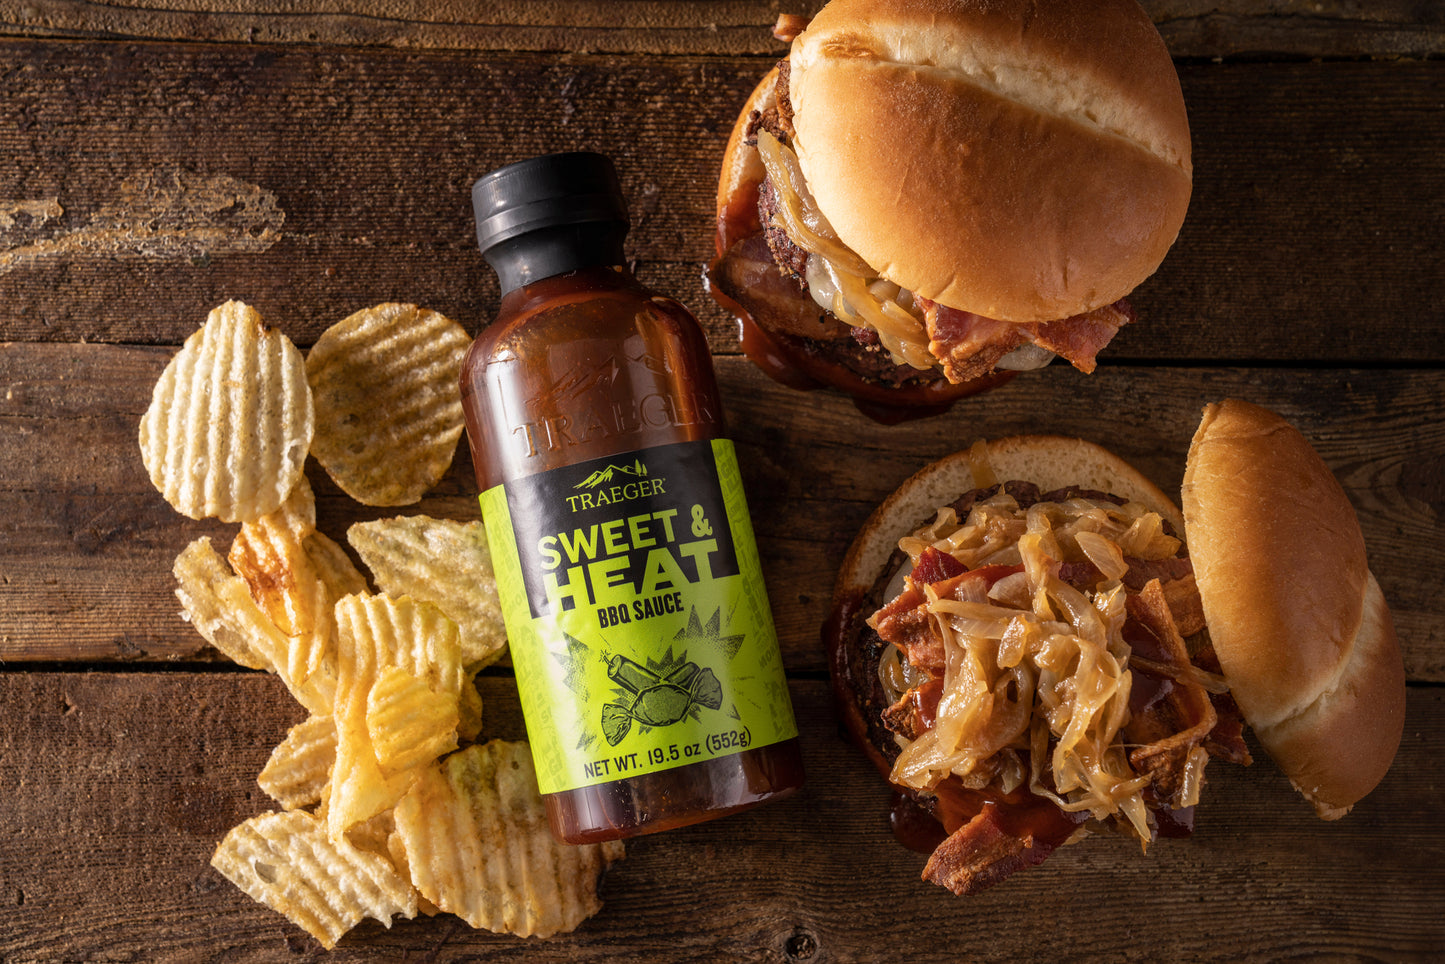 Serving suggestion: Pulled pork sandwich with ruffle potato chips.